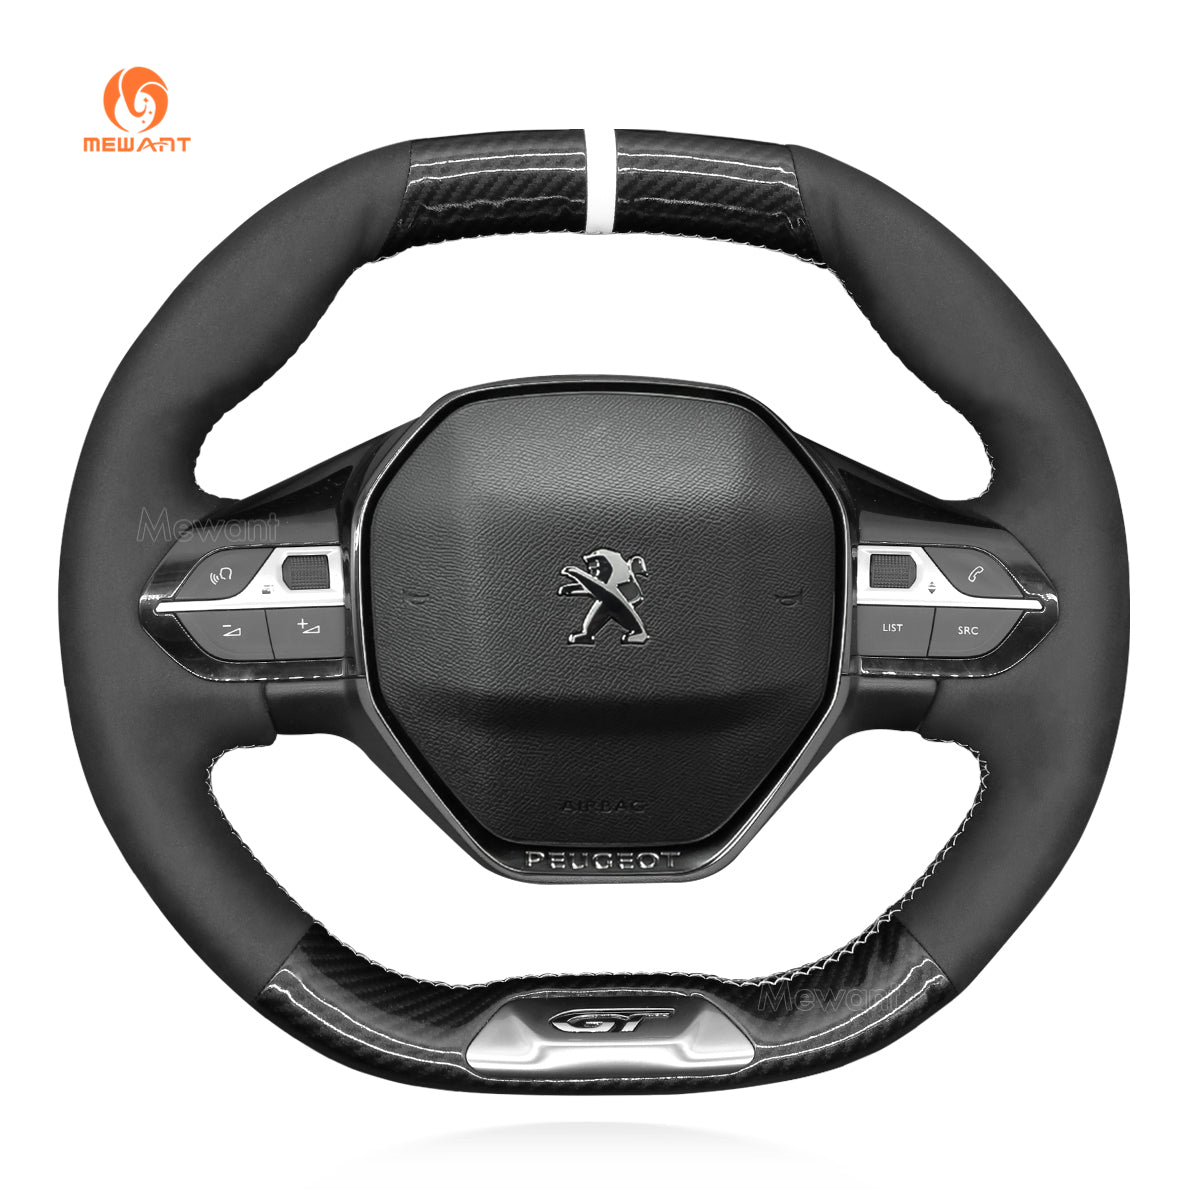 MEWANT Hand Stitch Car Steering Wheel Cover for Peugeot 208 308 SW 2008 3008 508 SW 5008 Rifter (GT/GT Line)